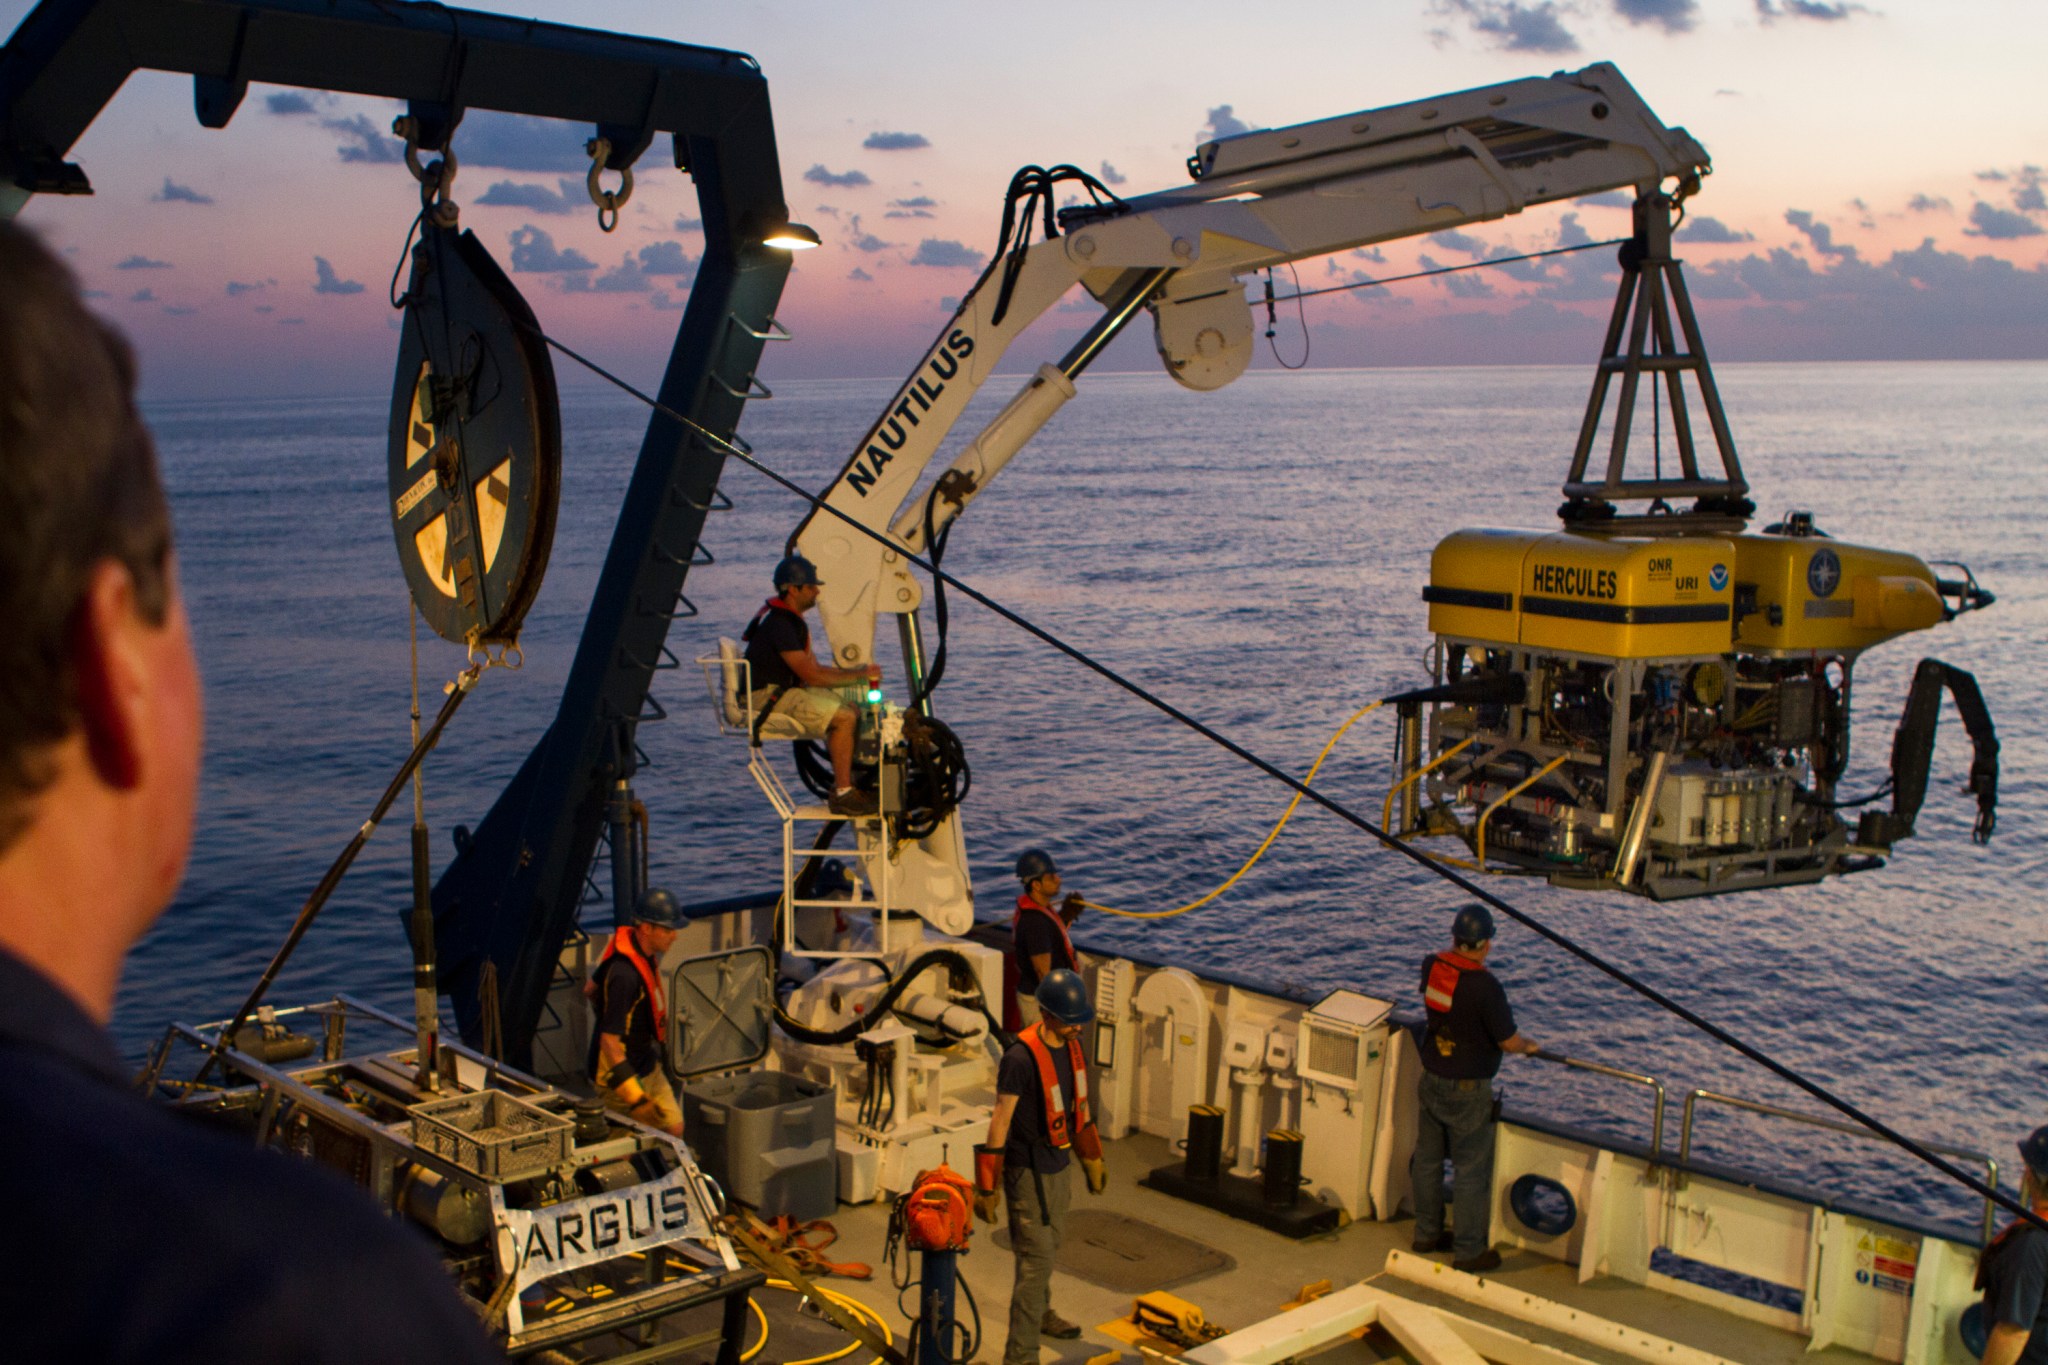 Crane holding up a robotic explorer from a boat at sea.